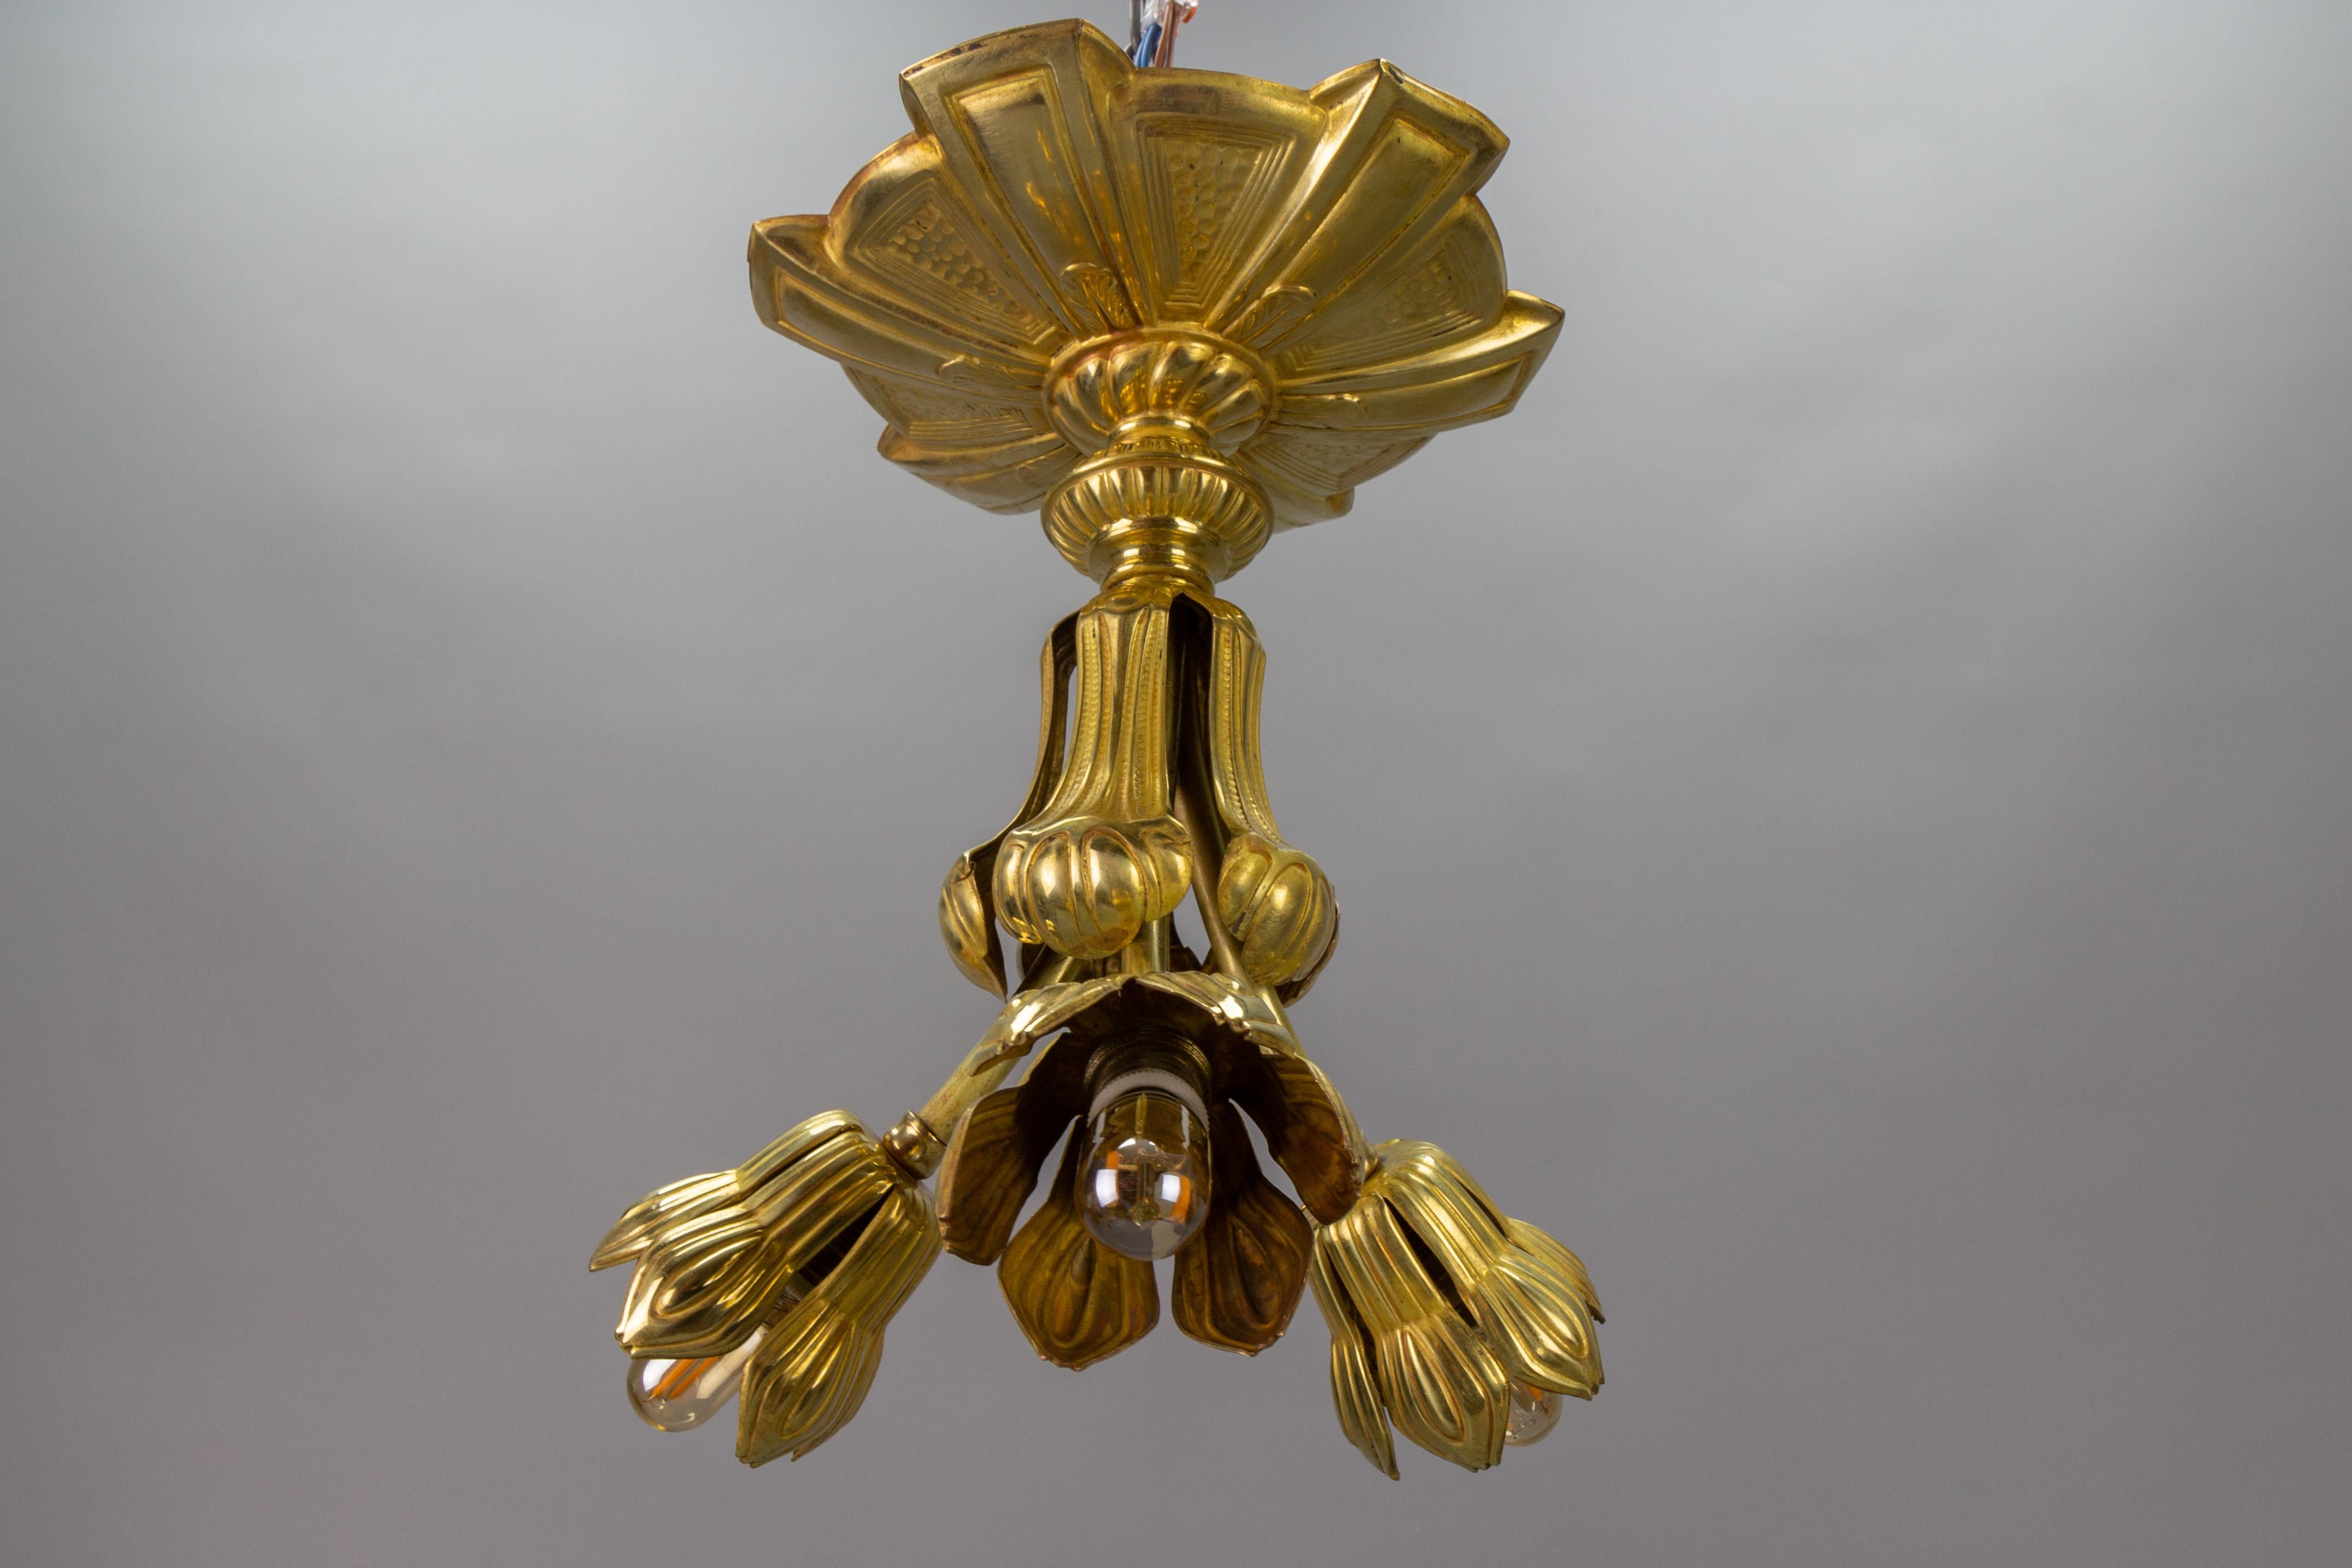  French Art Deco Three-Light Brass Ceiling Light Fixture, 1920s For Sale 4